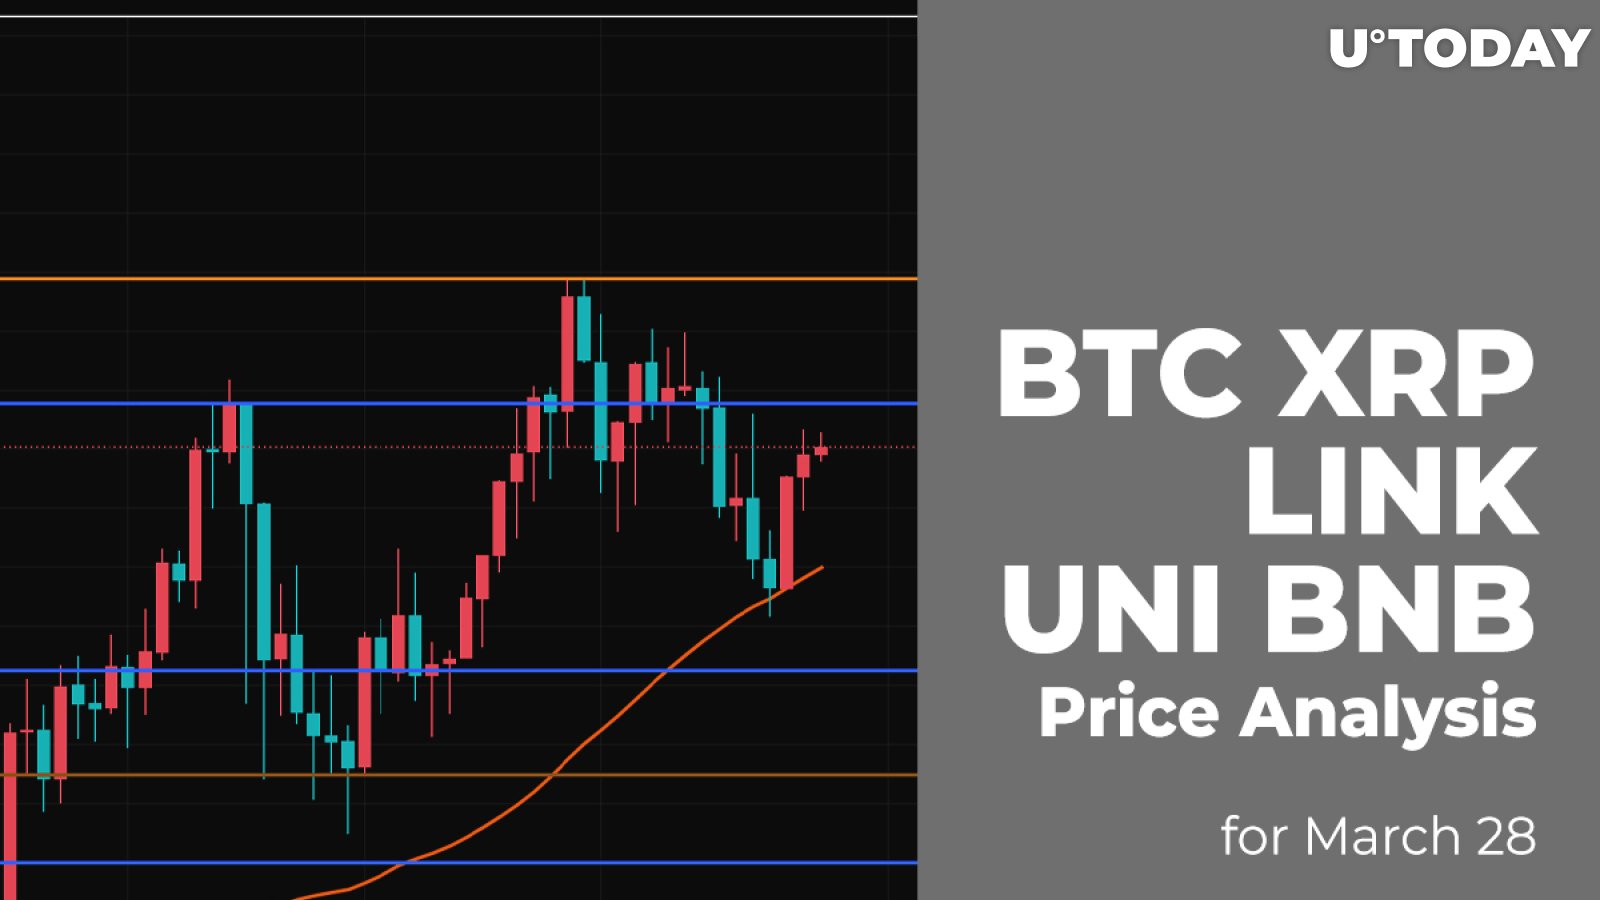 BTC, XRP, LINK, UNI and BNB Price Analysis for March 28